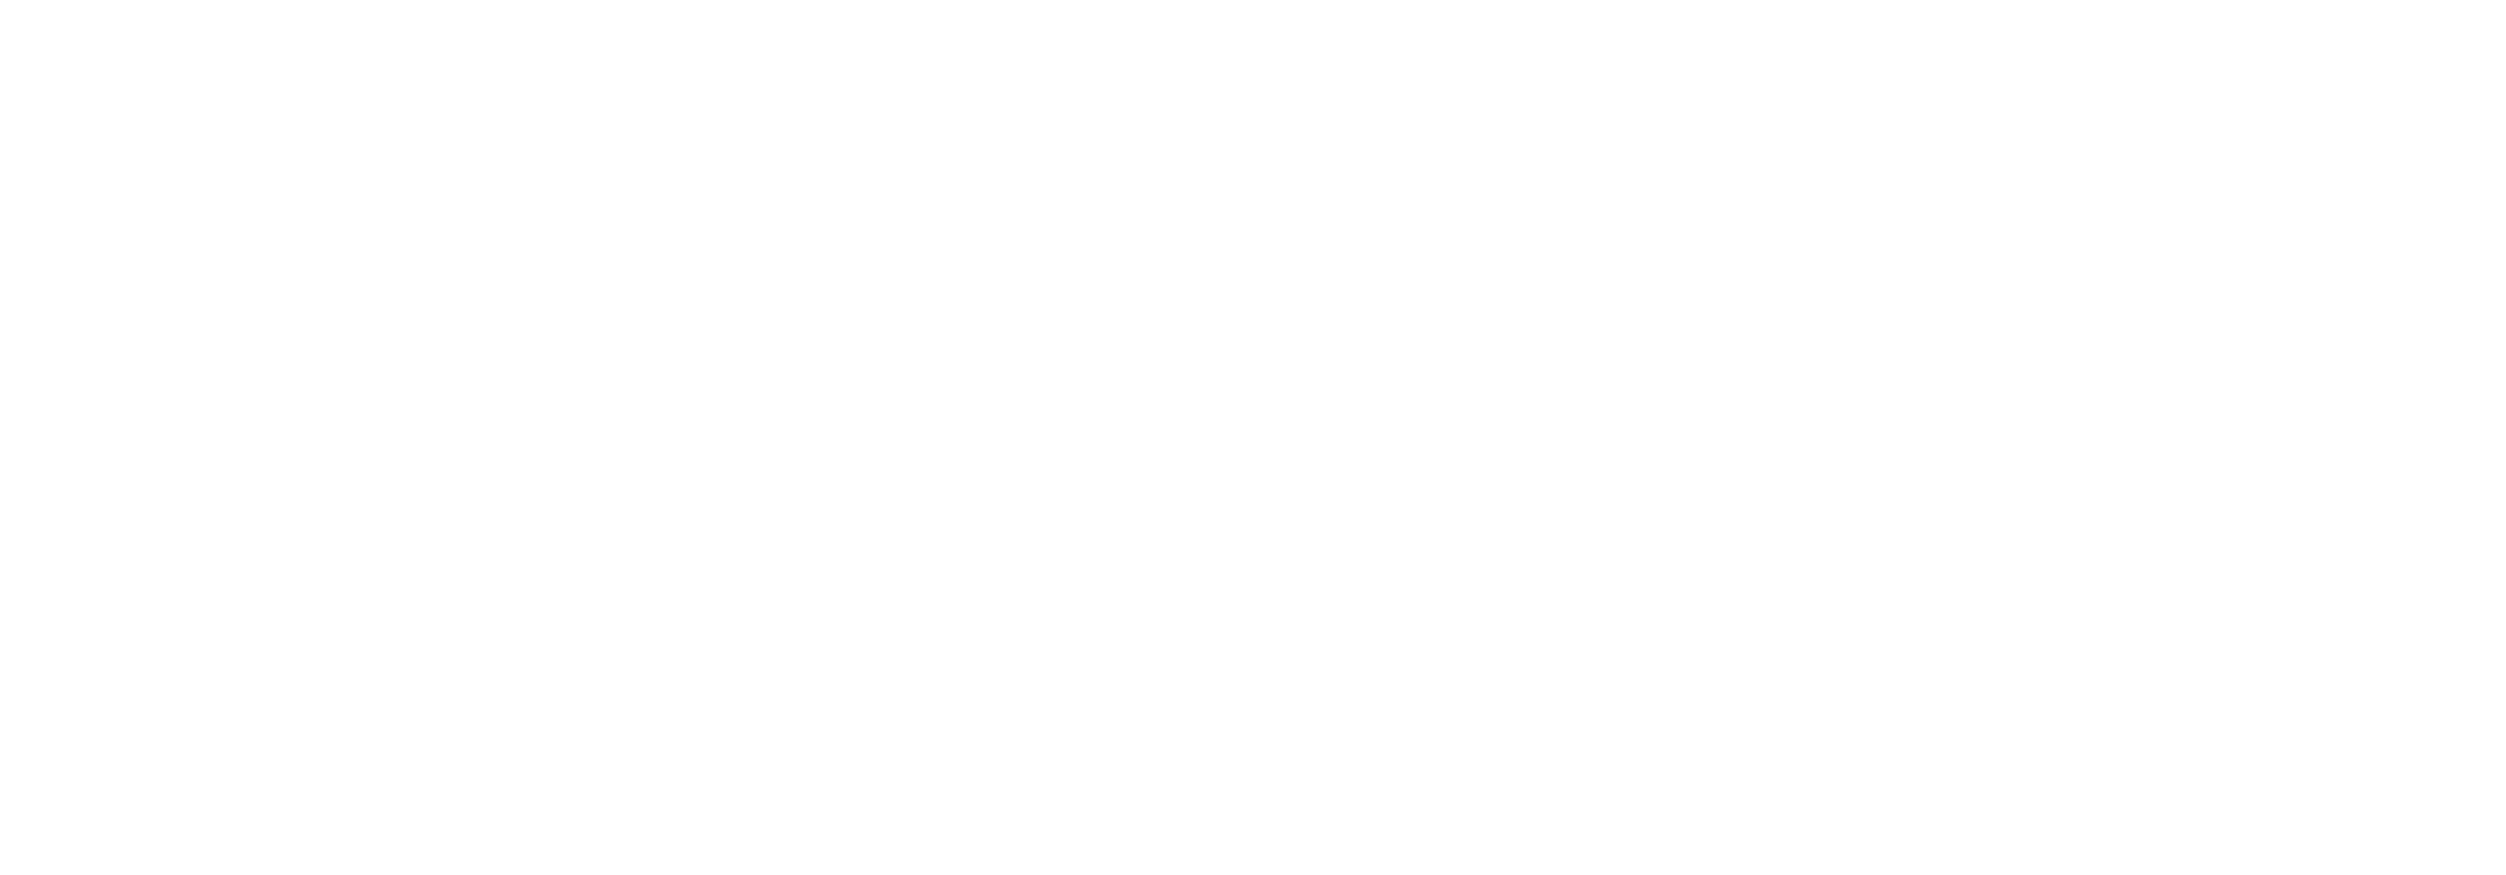 The logo for Aspire - Havering in white